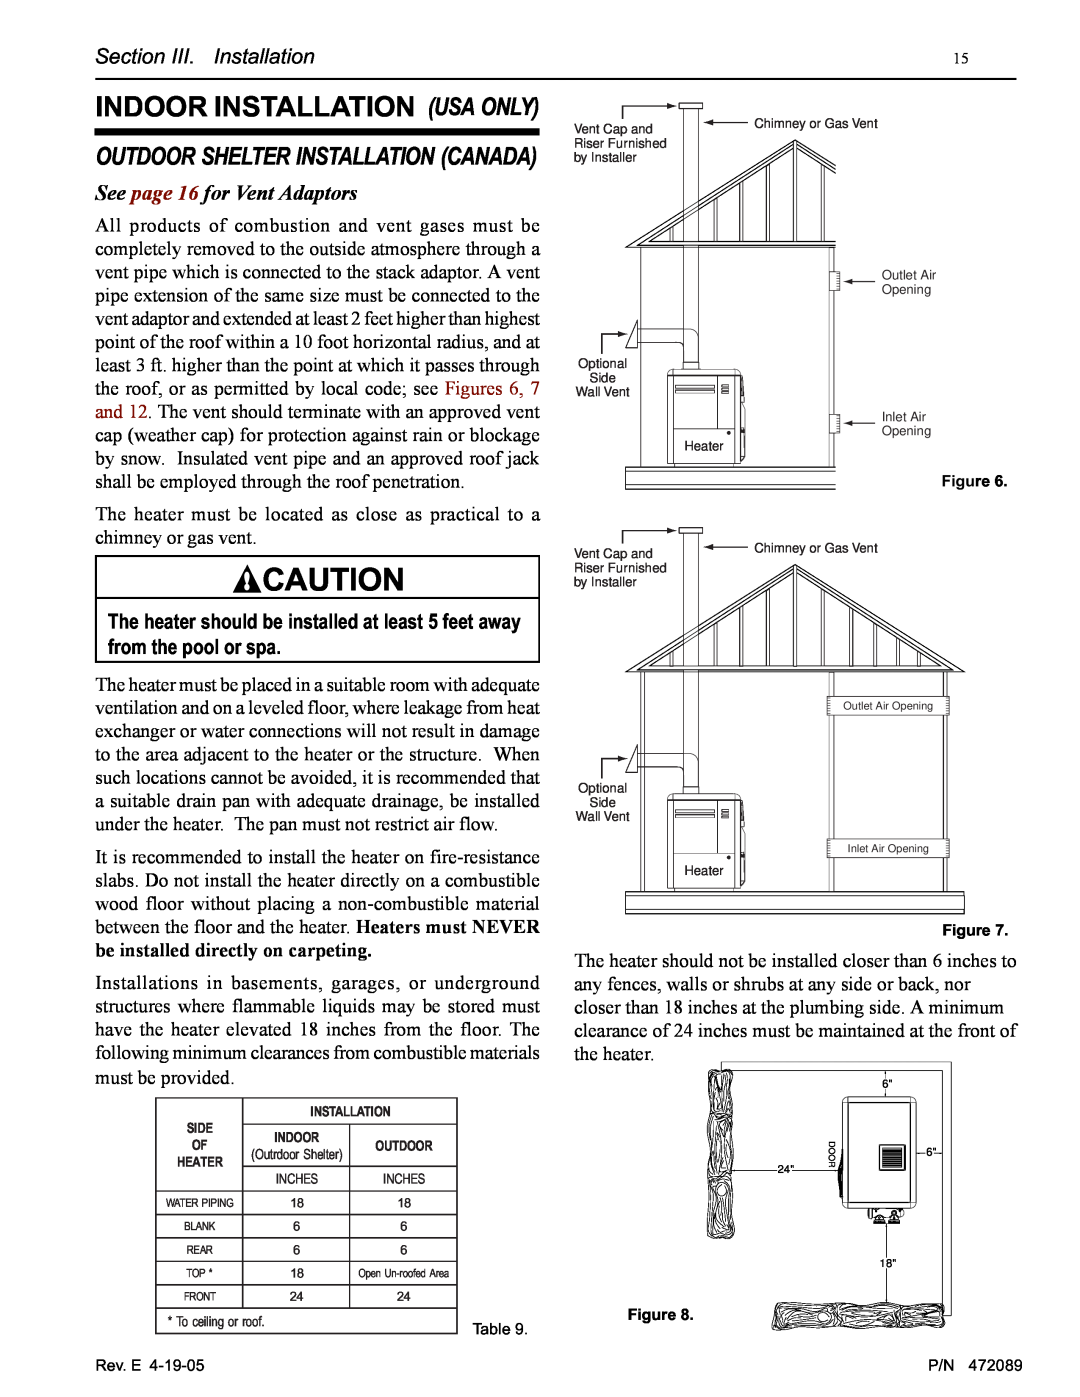 Pentair MiniMax NT LN Indoor Installation Usa Only, Outdoor Shelter Installation Canada, See page 16 for Vent Adaptors 